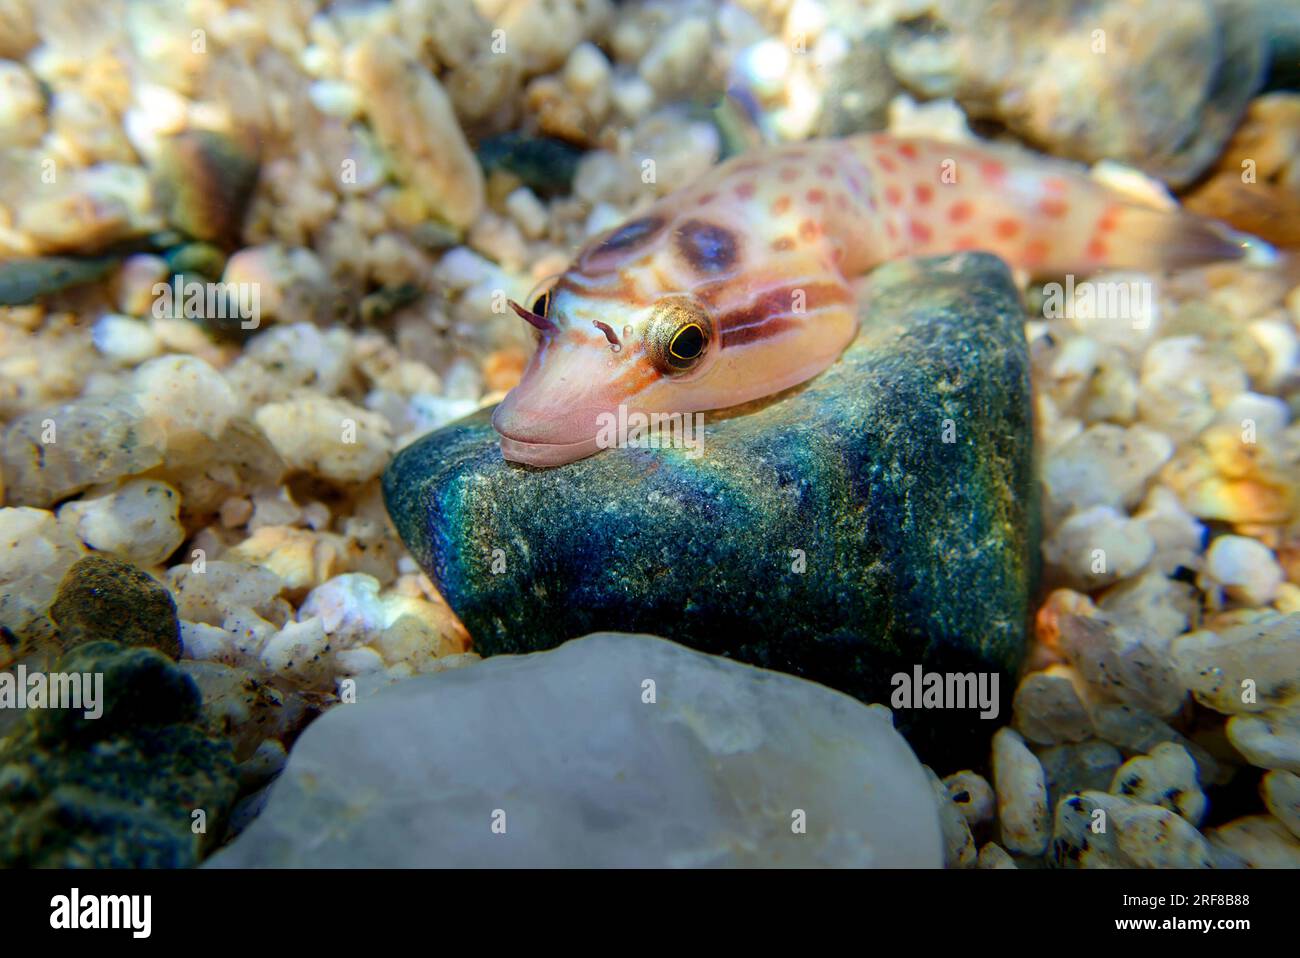 The shore clingfish - (Lepadogaster lepadogaster), underwater image into the Mediterranean sea Stock Photo